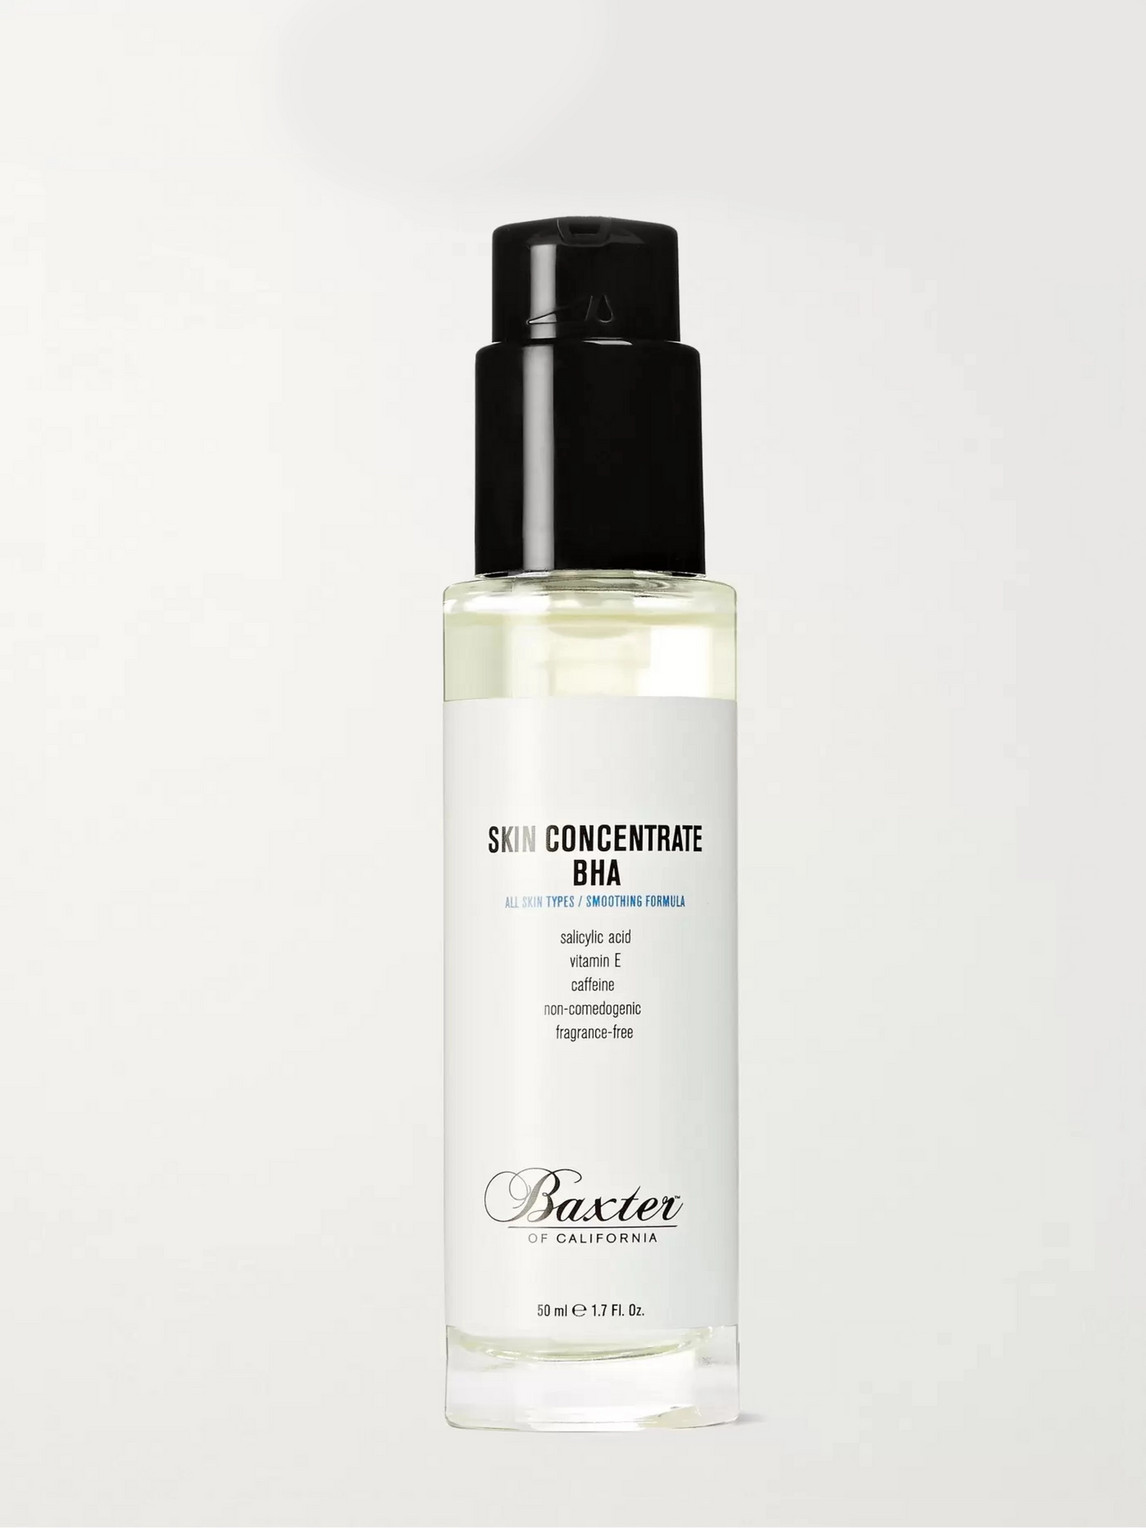 BAXTER OF CALIFORNIA SKIN CONCENTRATE BHA, 50ML